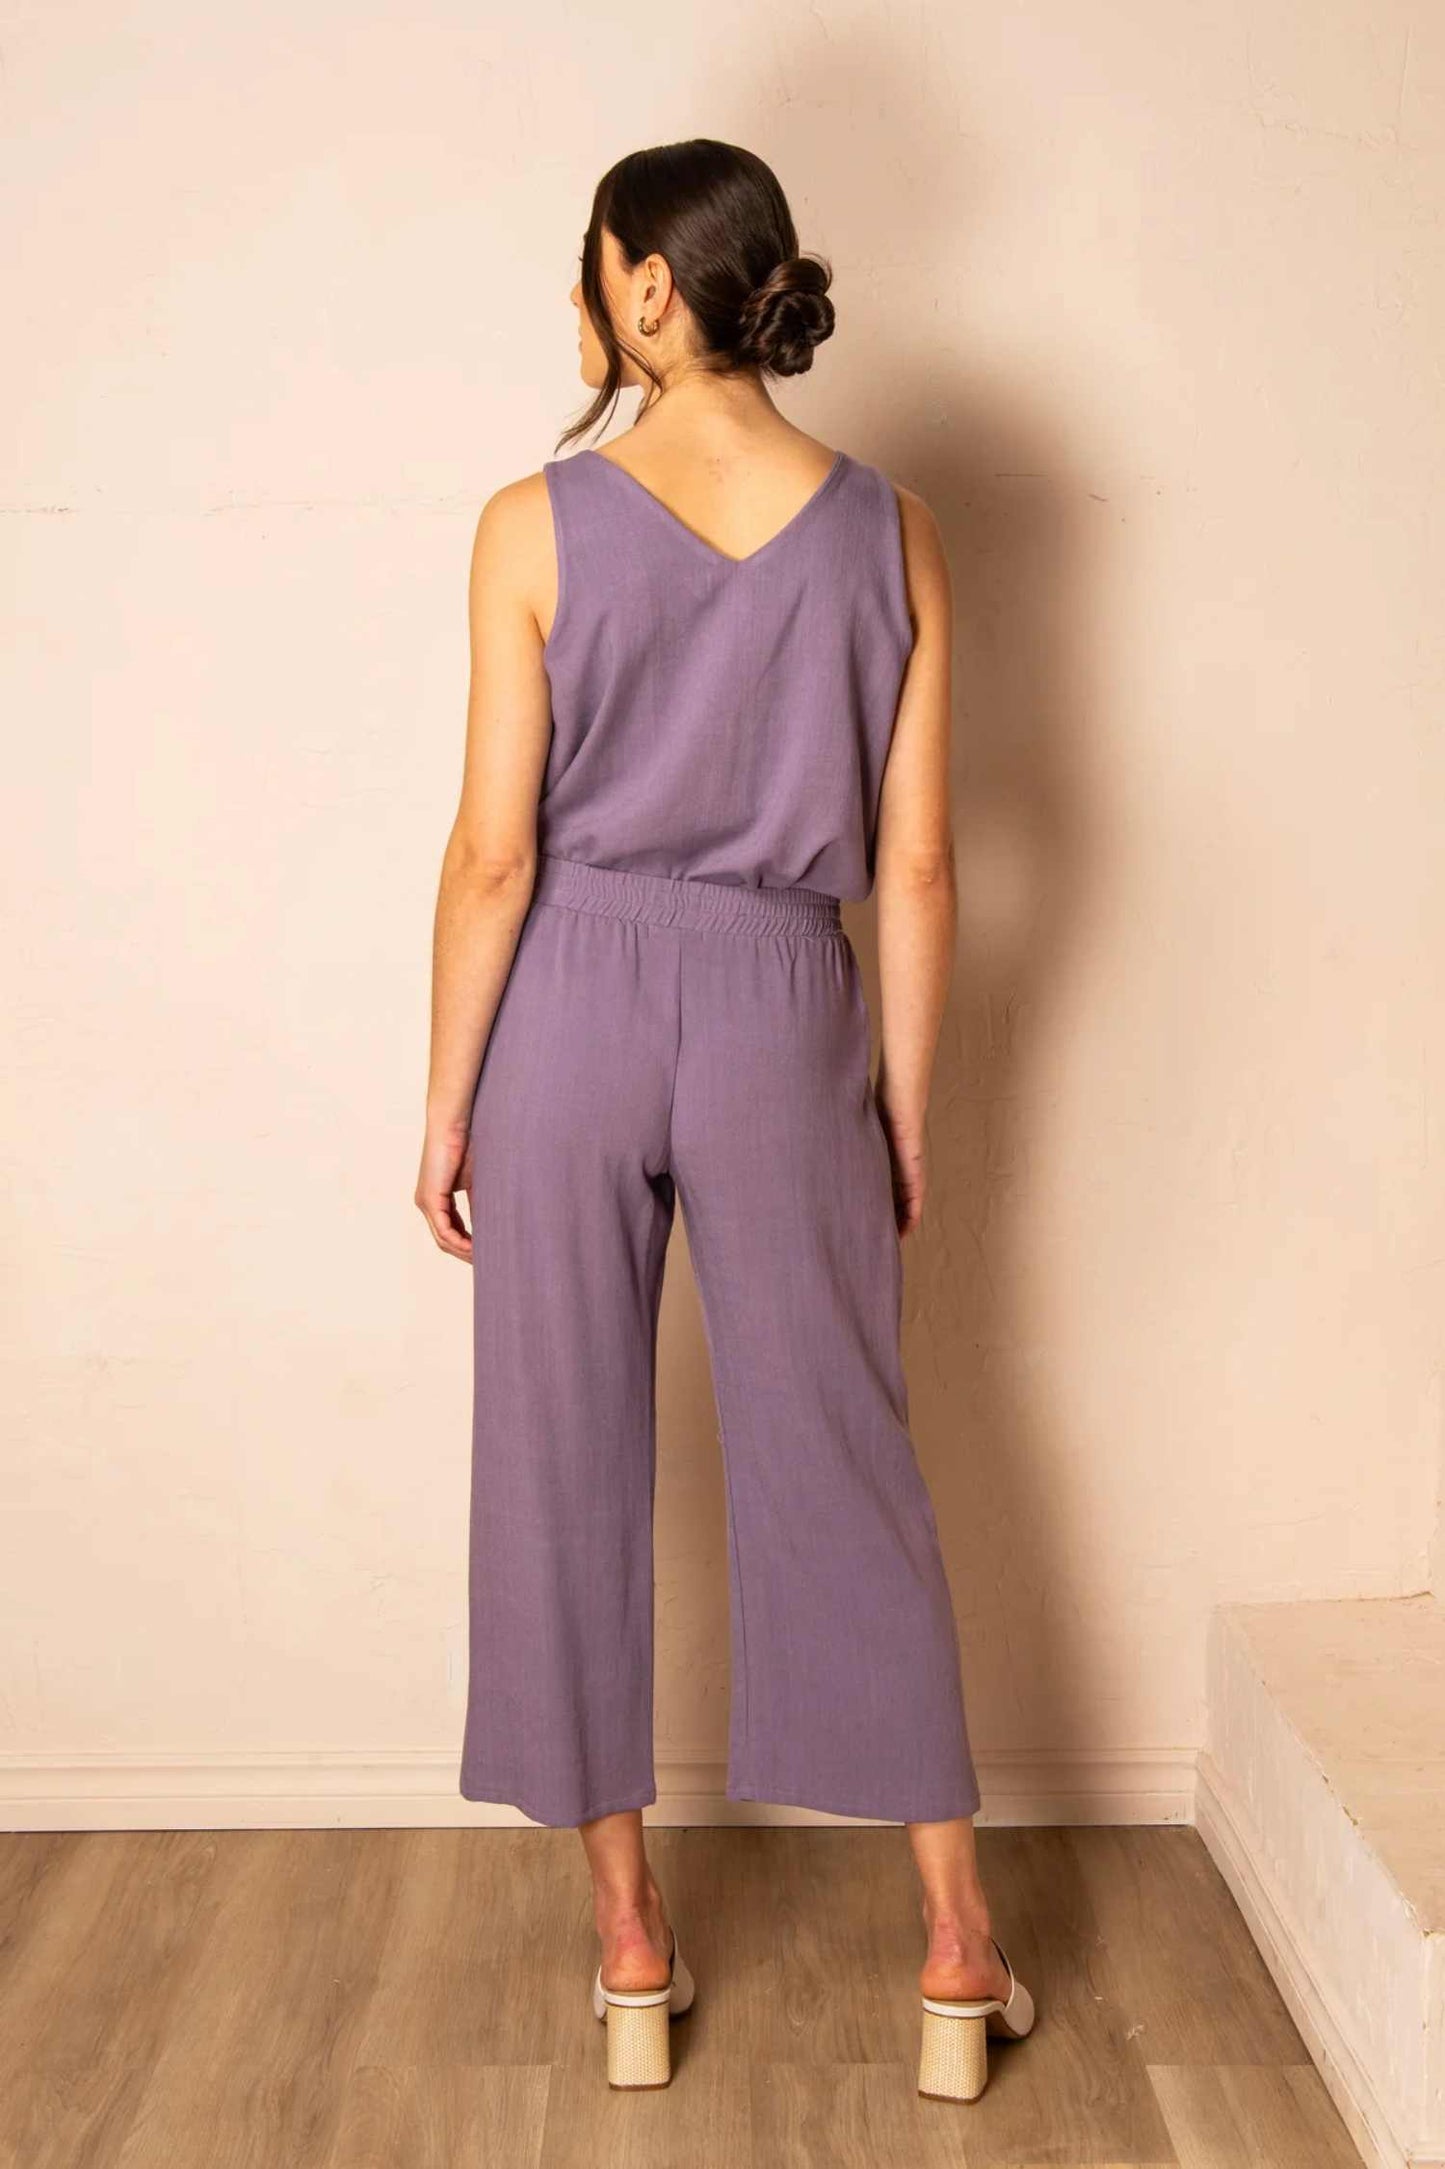 Back view photo of a woman wearing the Serenity Pants by Cherry Bobin in Mauve, standing in front of a wall 